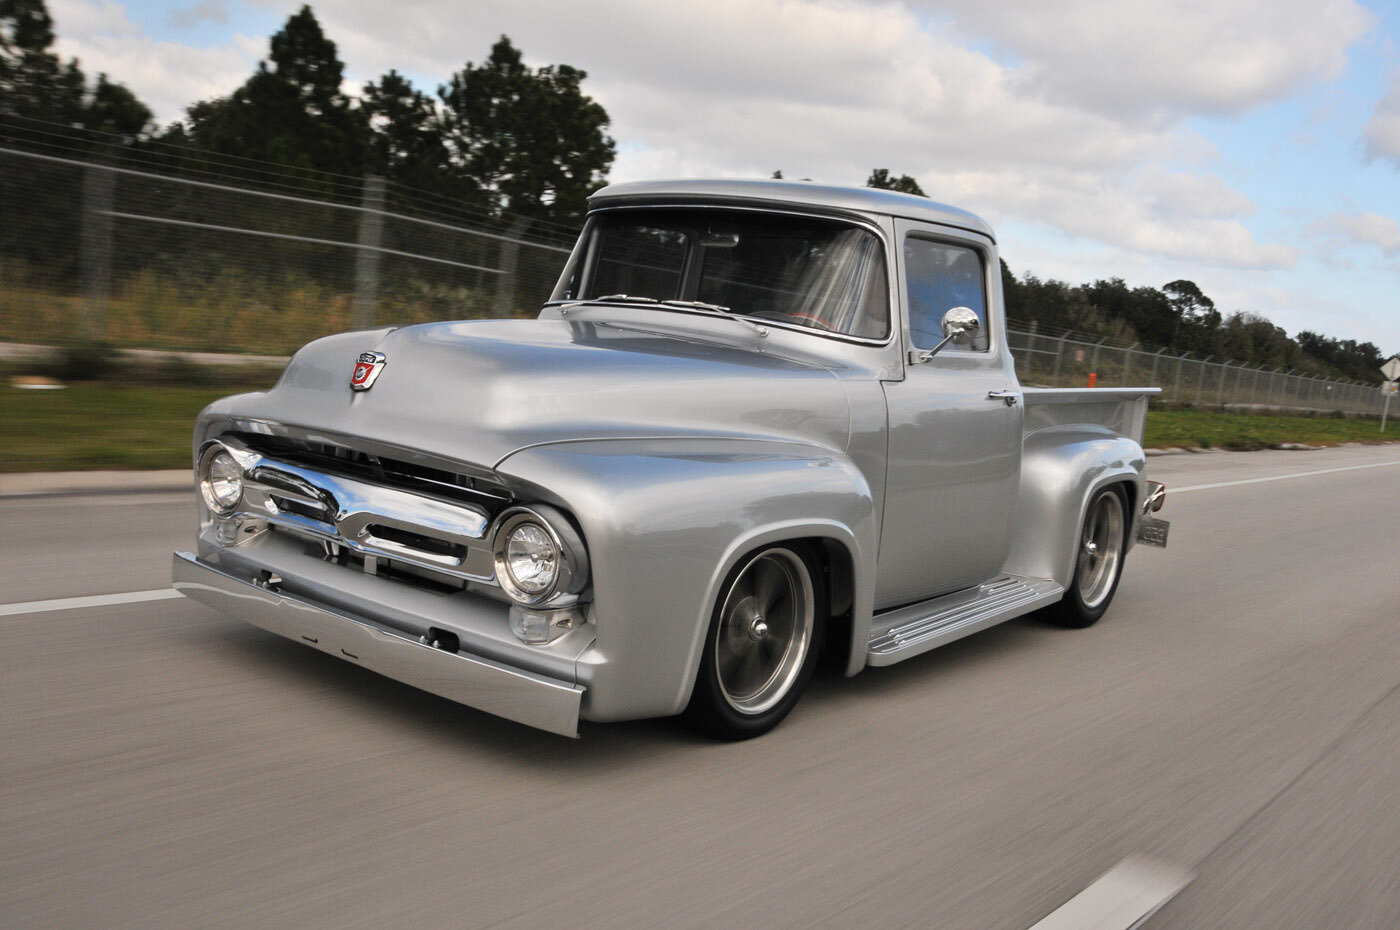 						Ford F100 A1
			